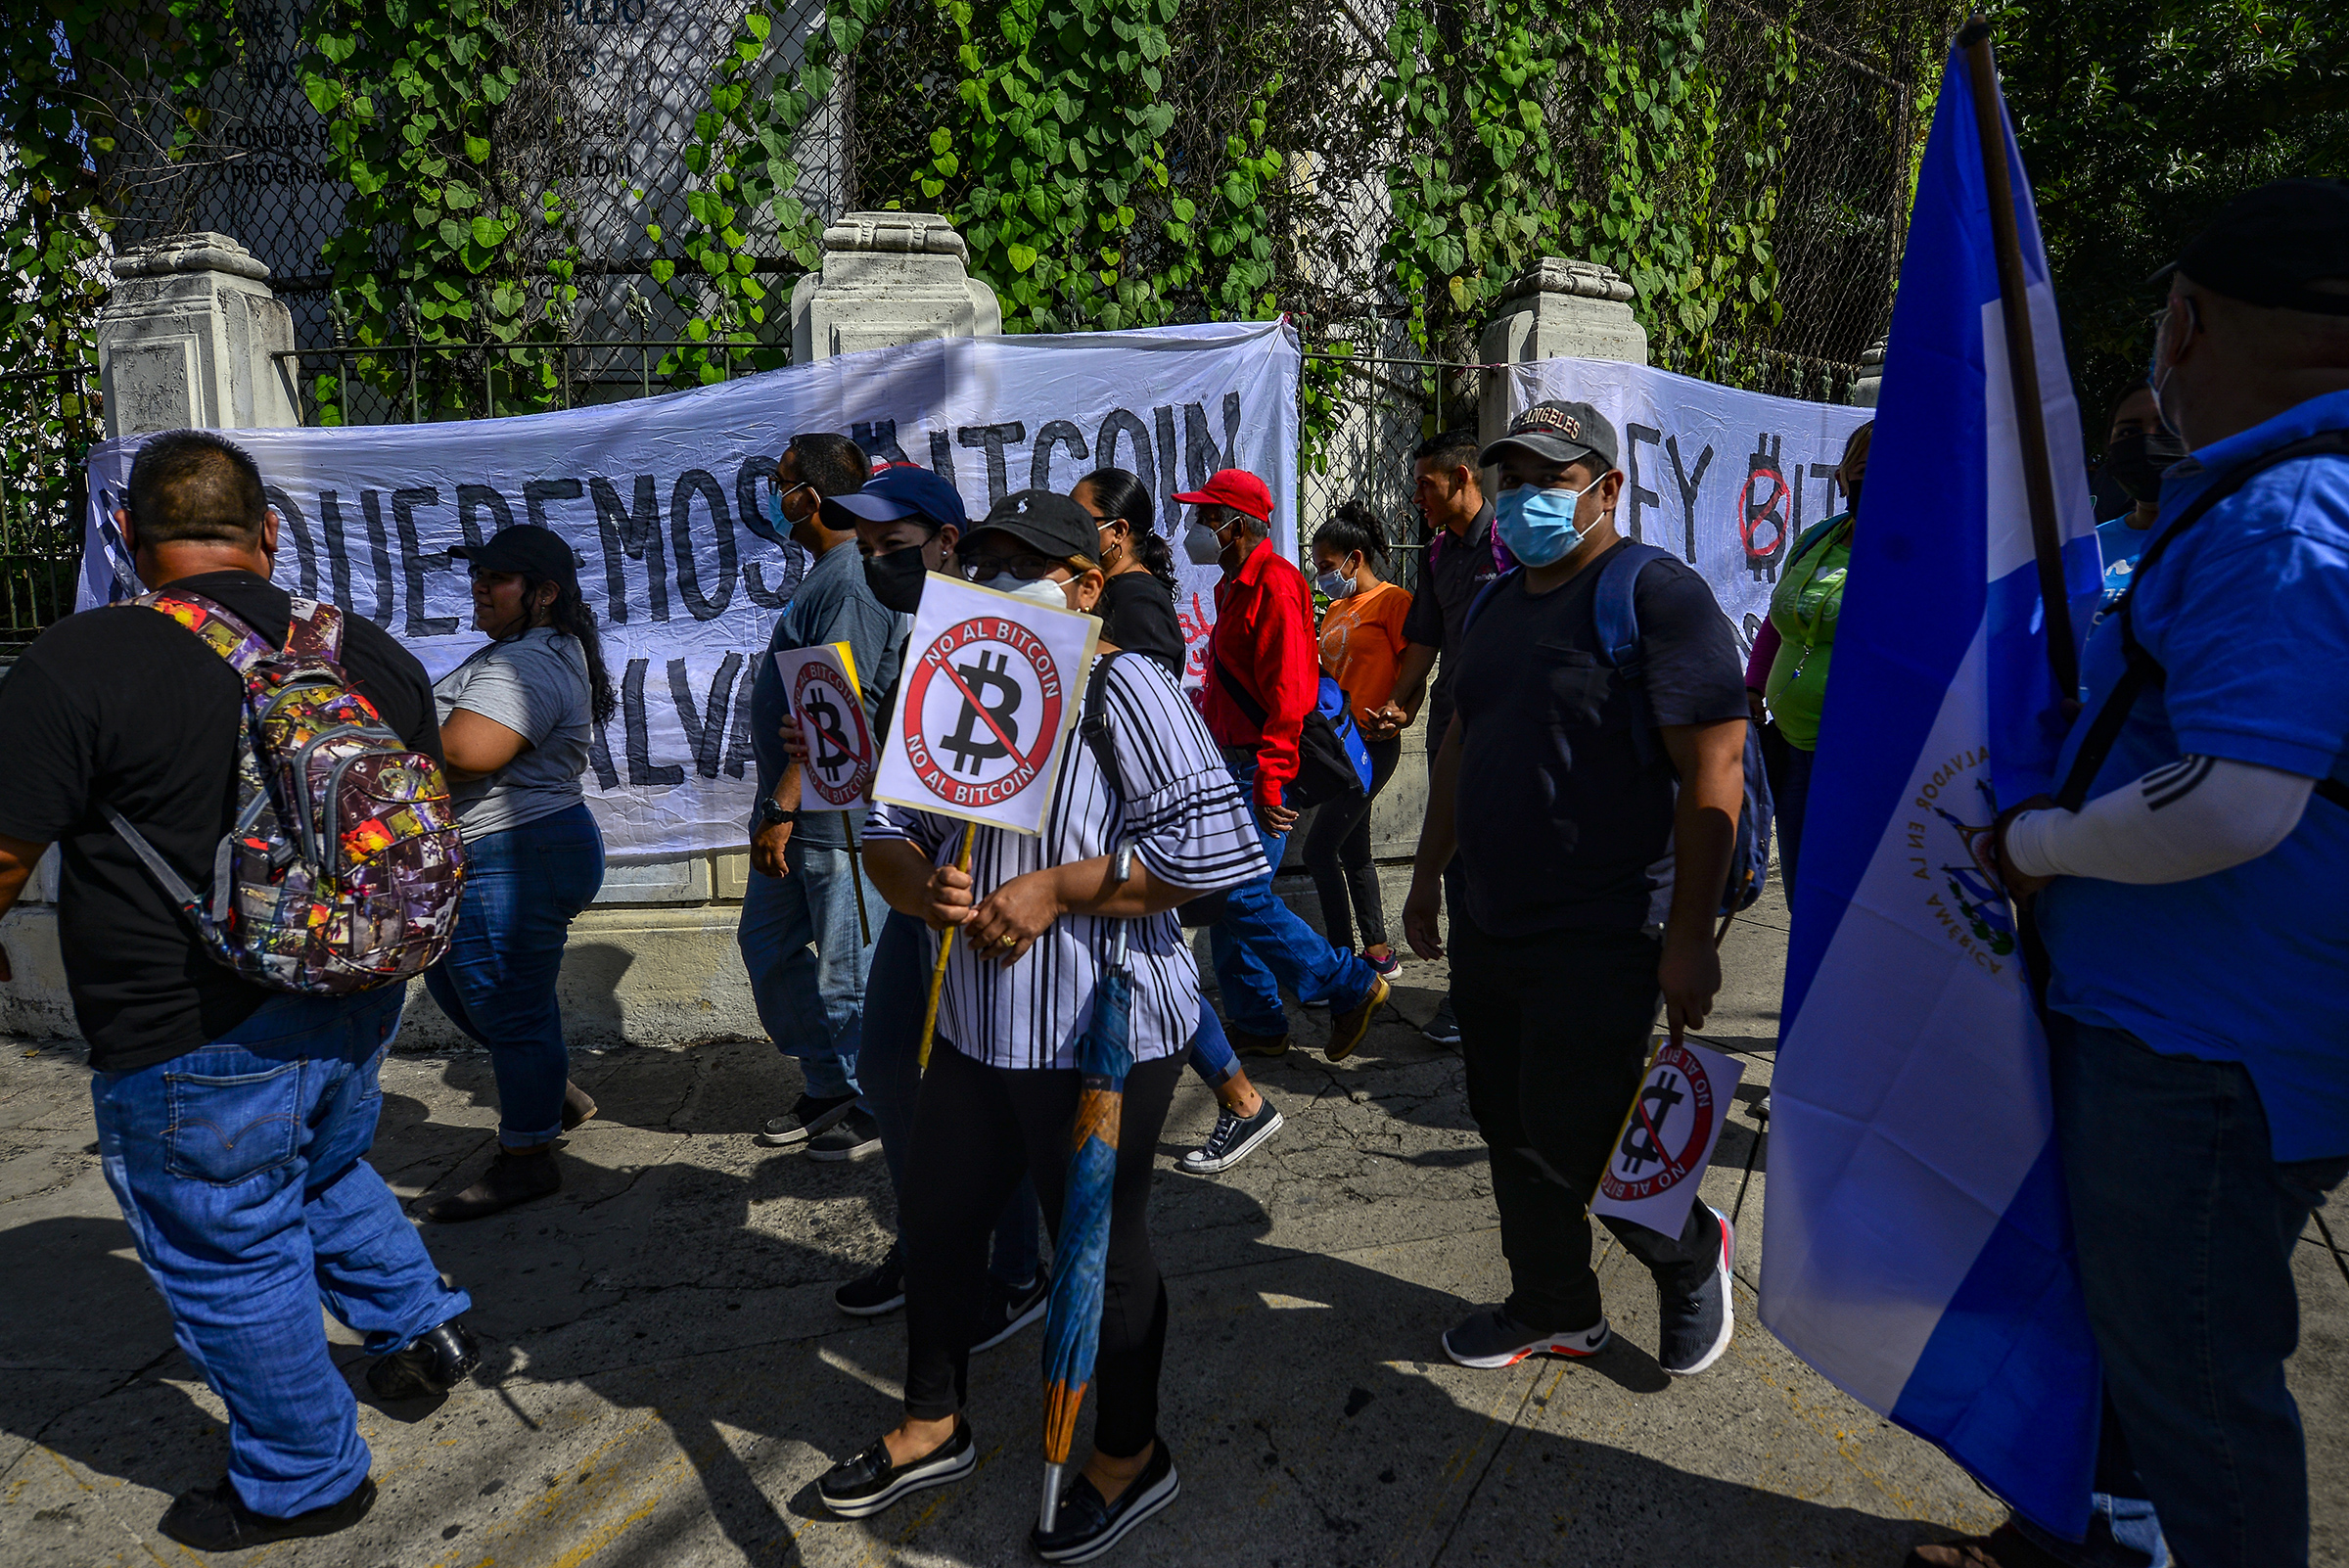 Demonstrators hold signs during a protest against President Bukele and Bitcoin in San Salvador on Sept. 15, 2021. (Camilo Freedman—Bloomberg/Getty Images)